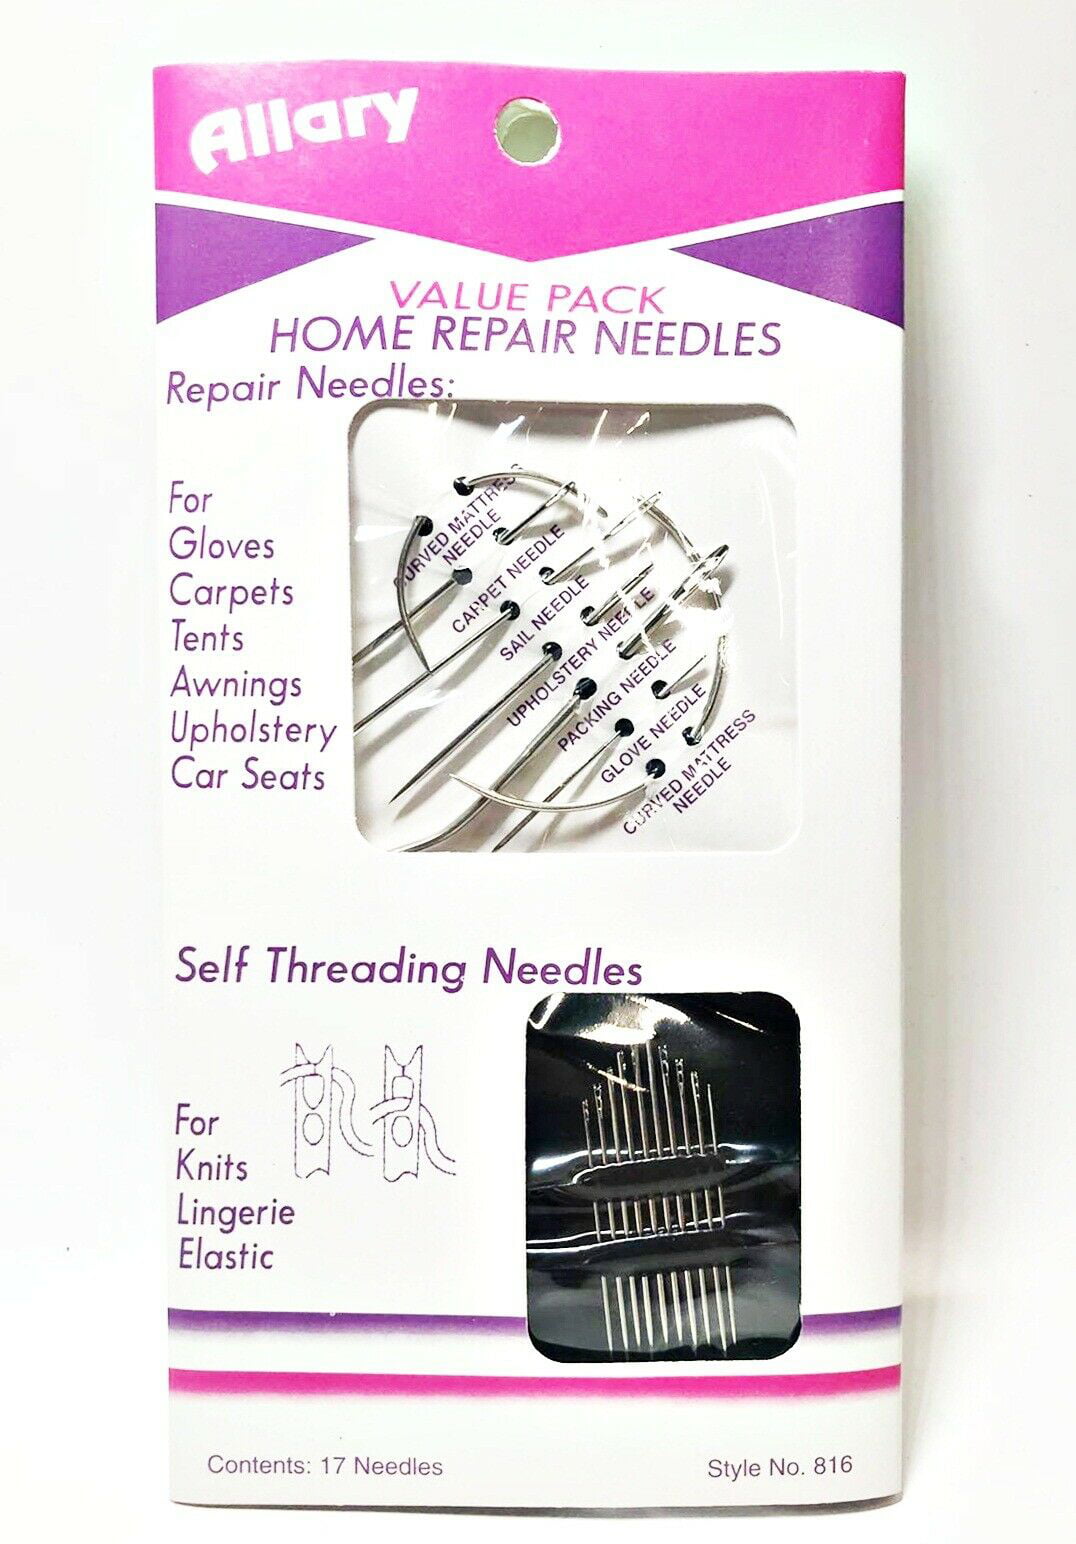 25 PCS Large Eye Sharp Sewing Needles - Stainless Steel Hand Quilting  Needles in a Handy Storage Tube